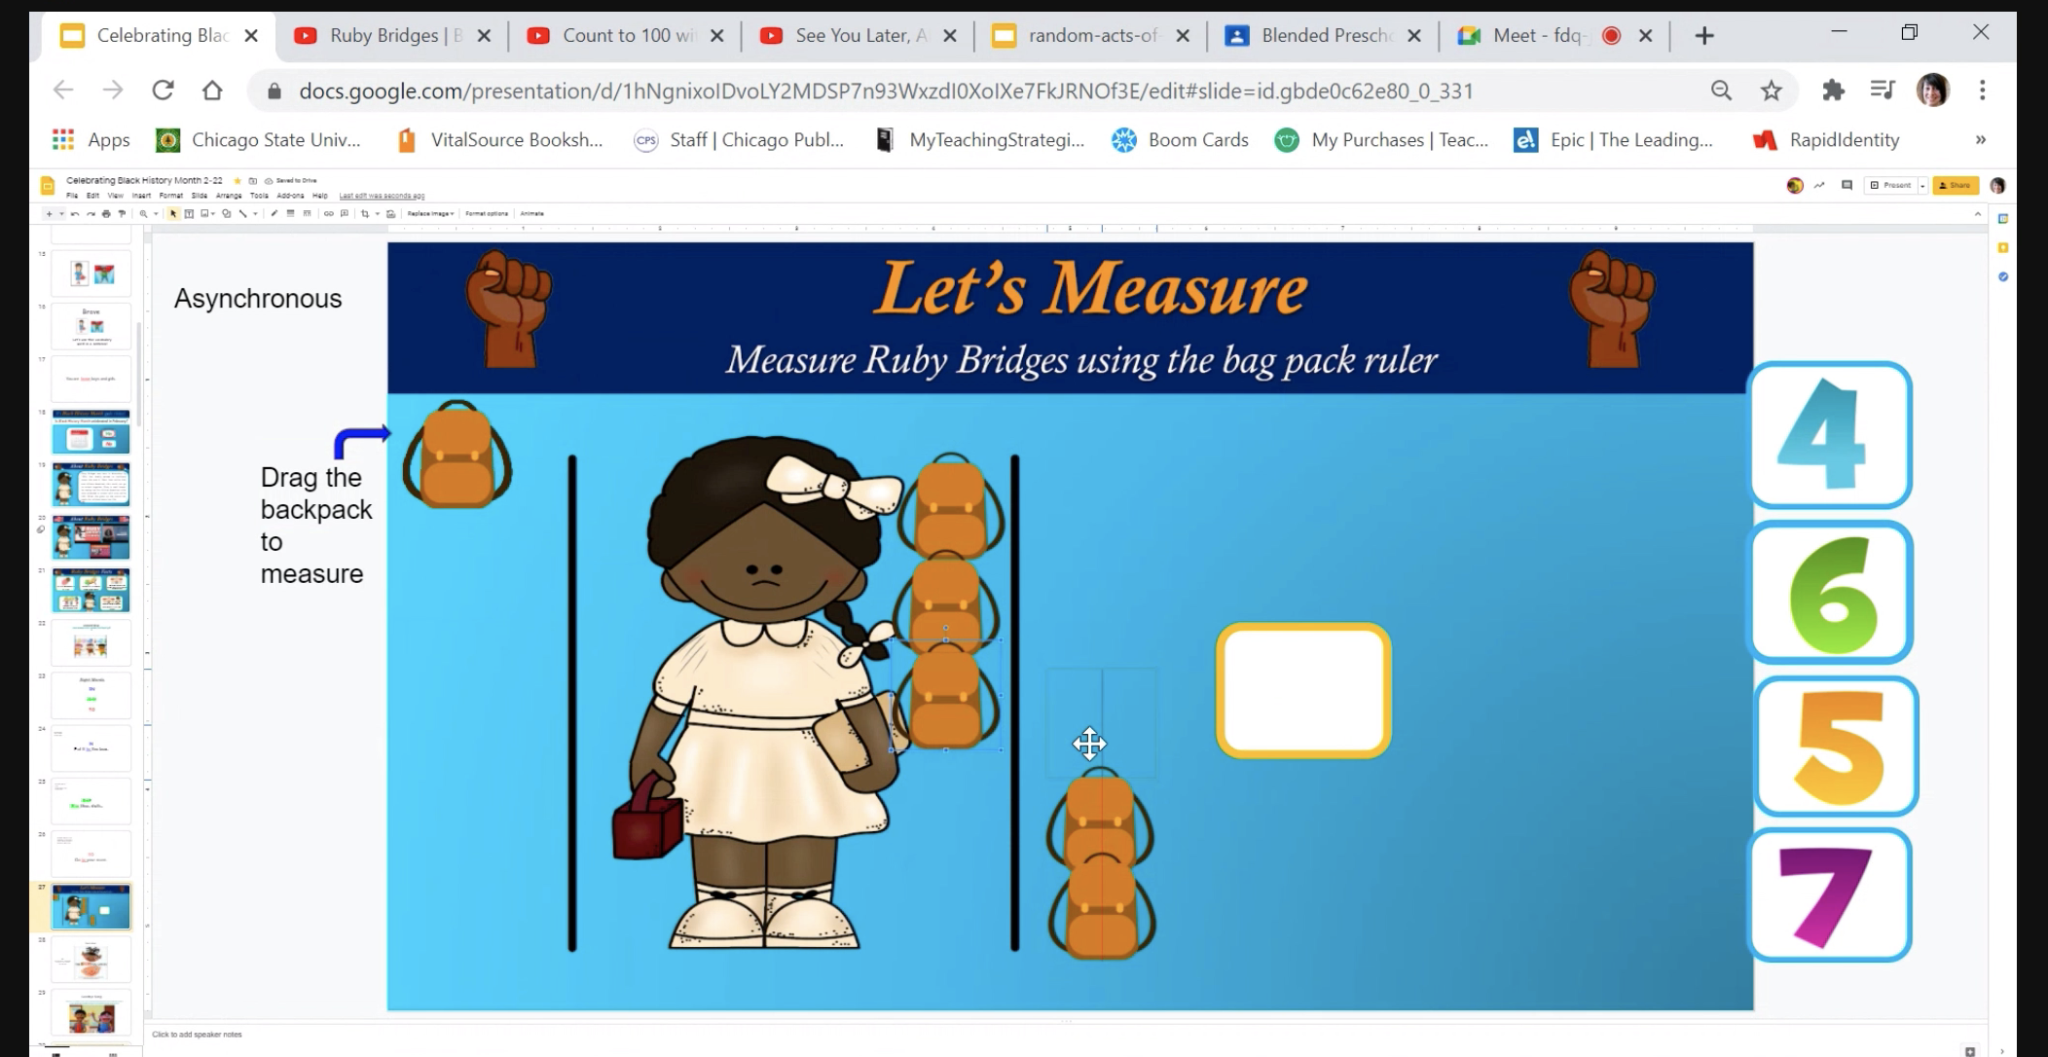 A graphic using Ruby Bridges in a math problem